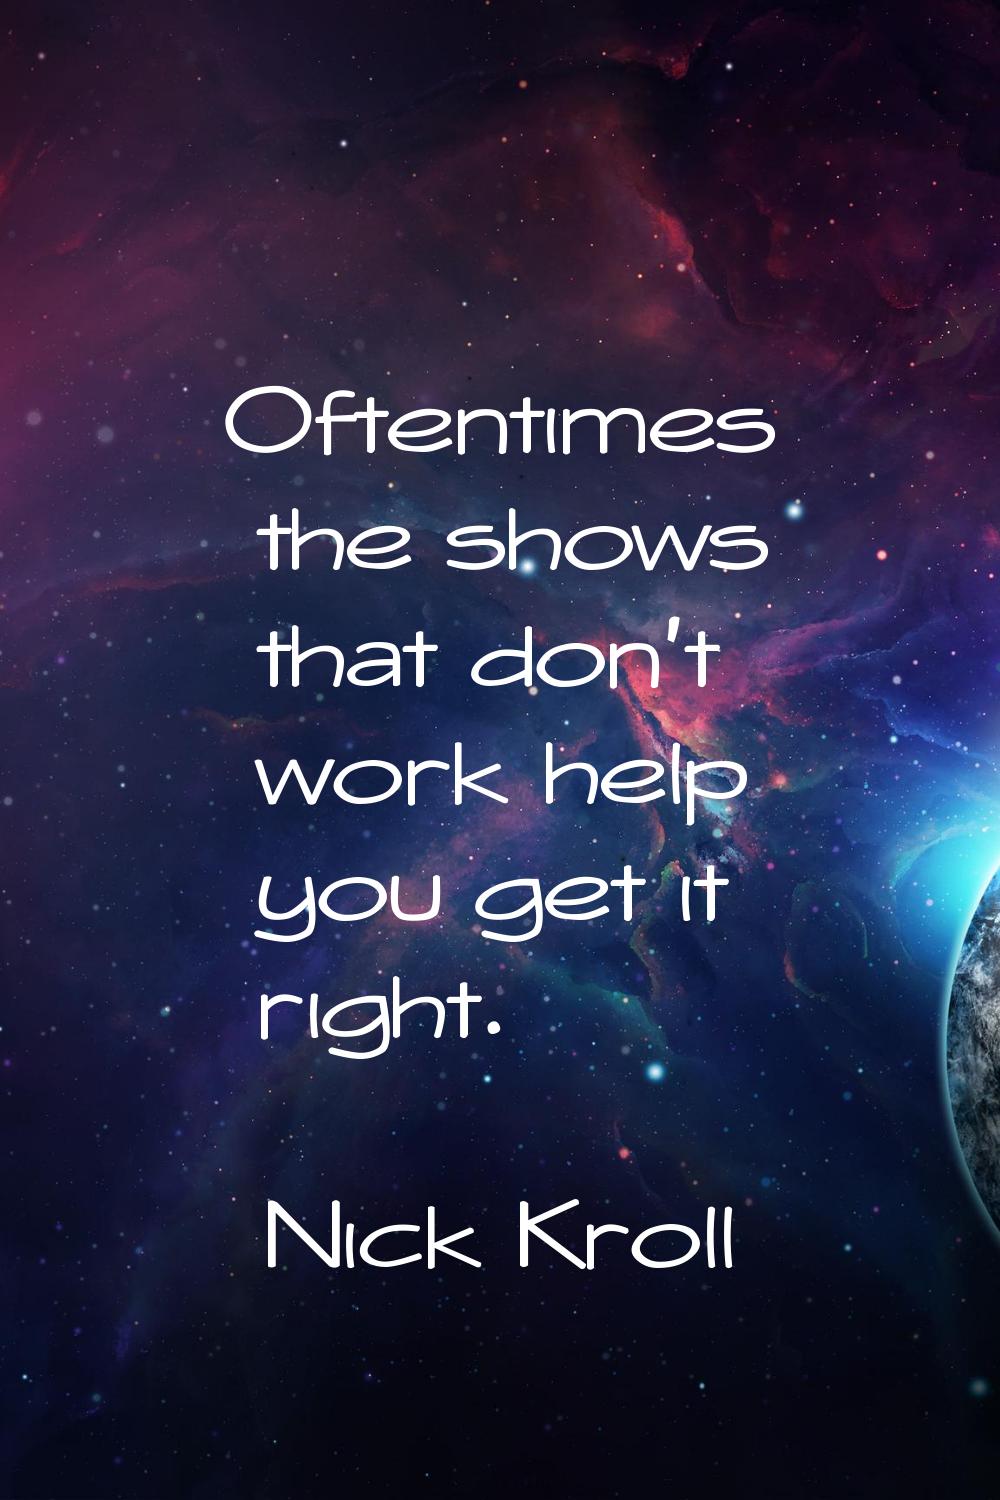 Oftentimes the shows that don't work help you get it right.